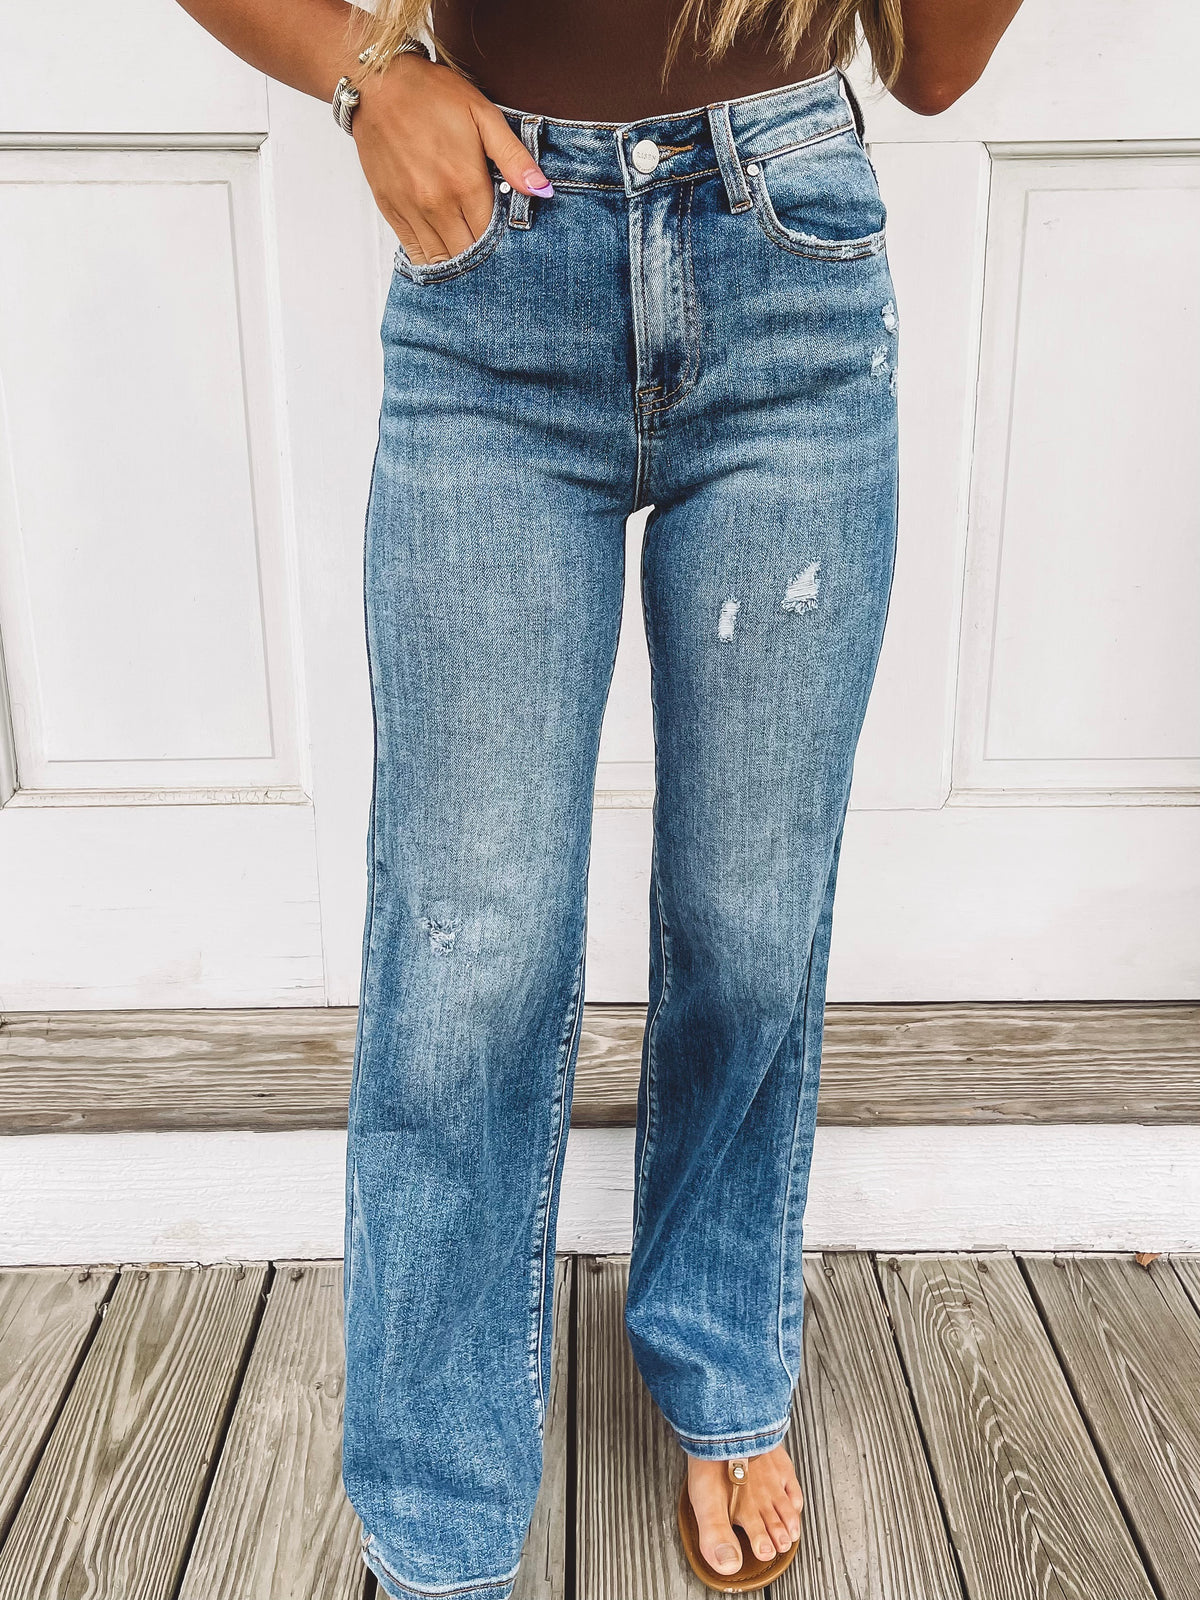 Reese Jeans in Medium Wash